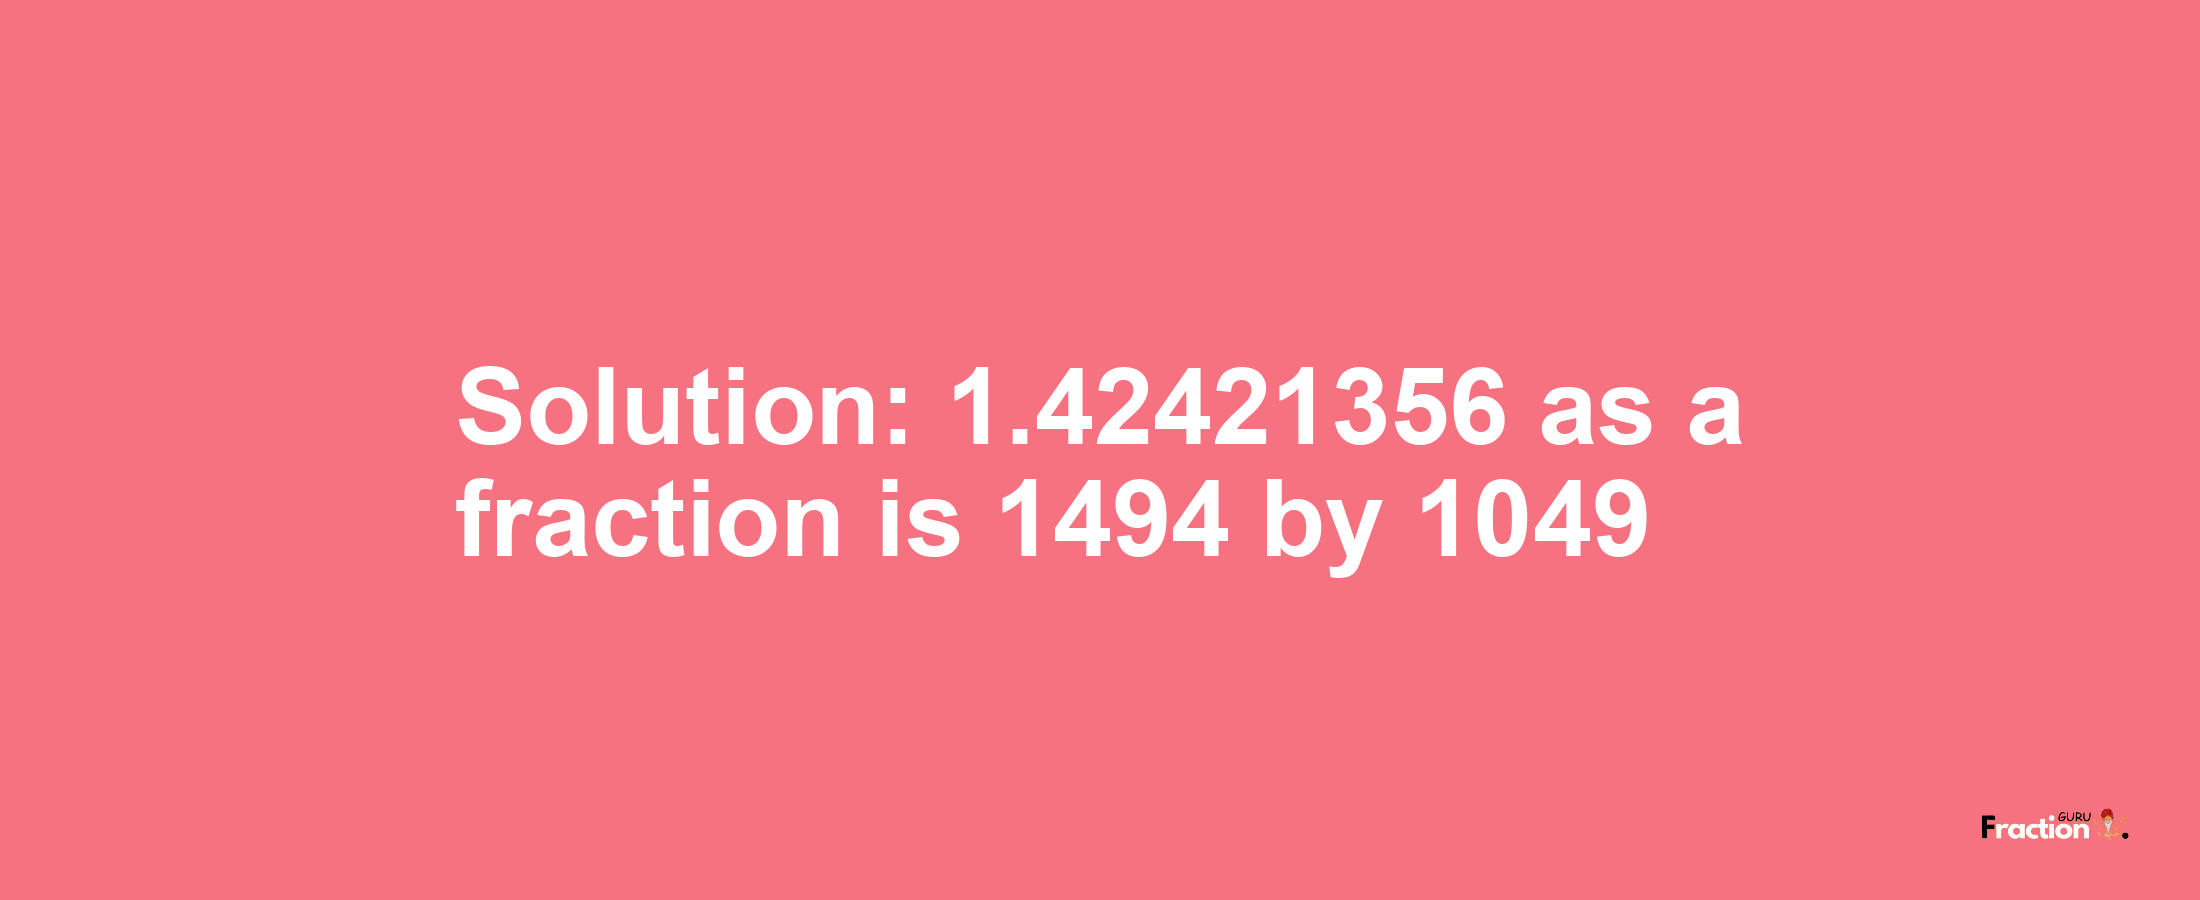 Solution:1.42421356 as a fraction is 1494/1049